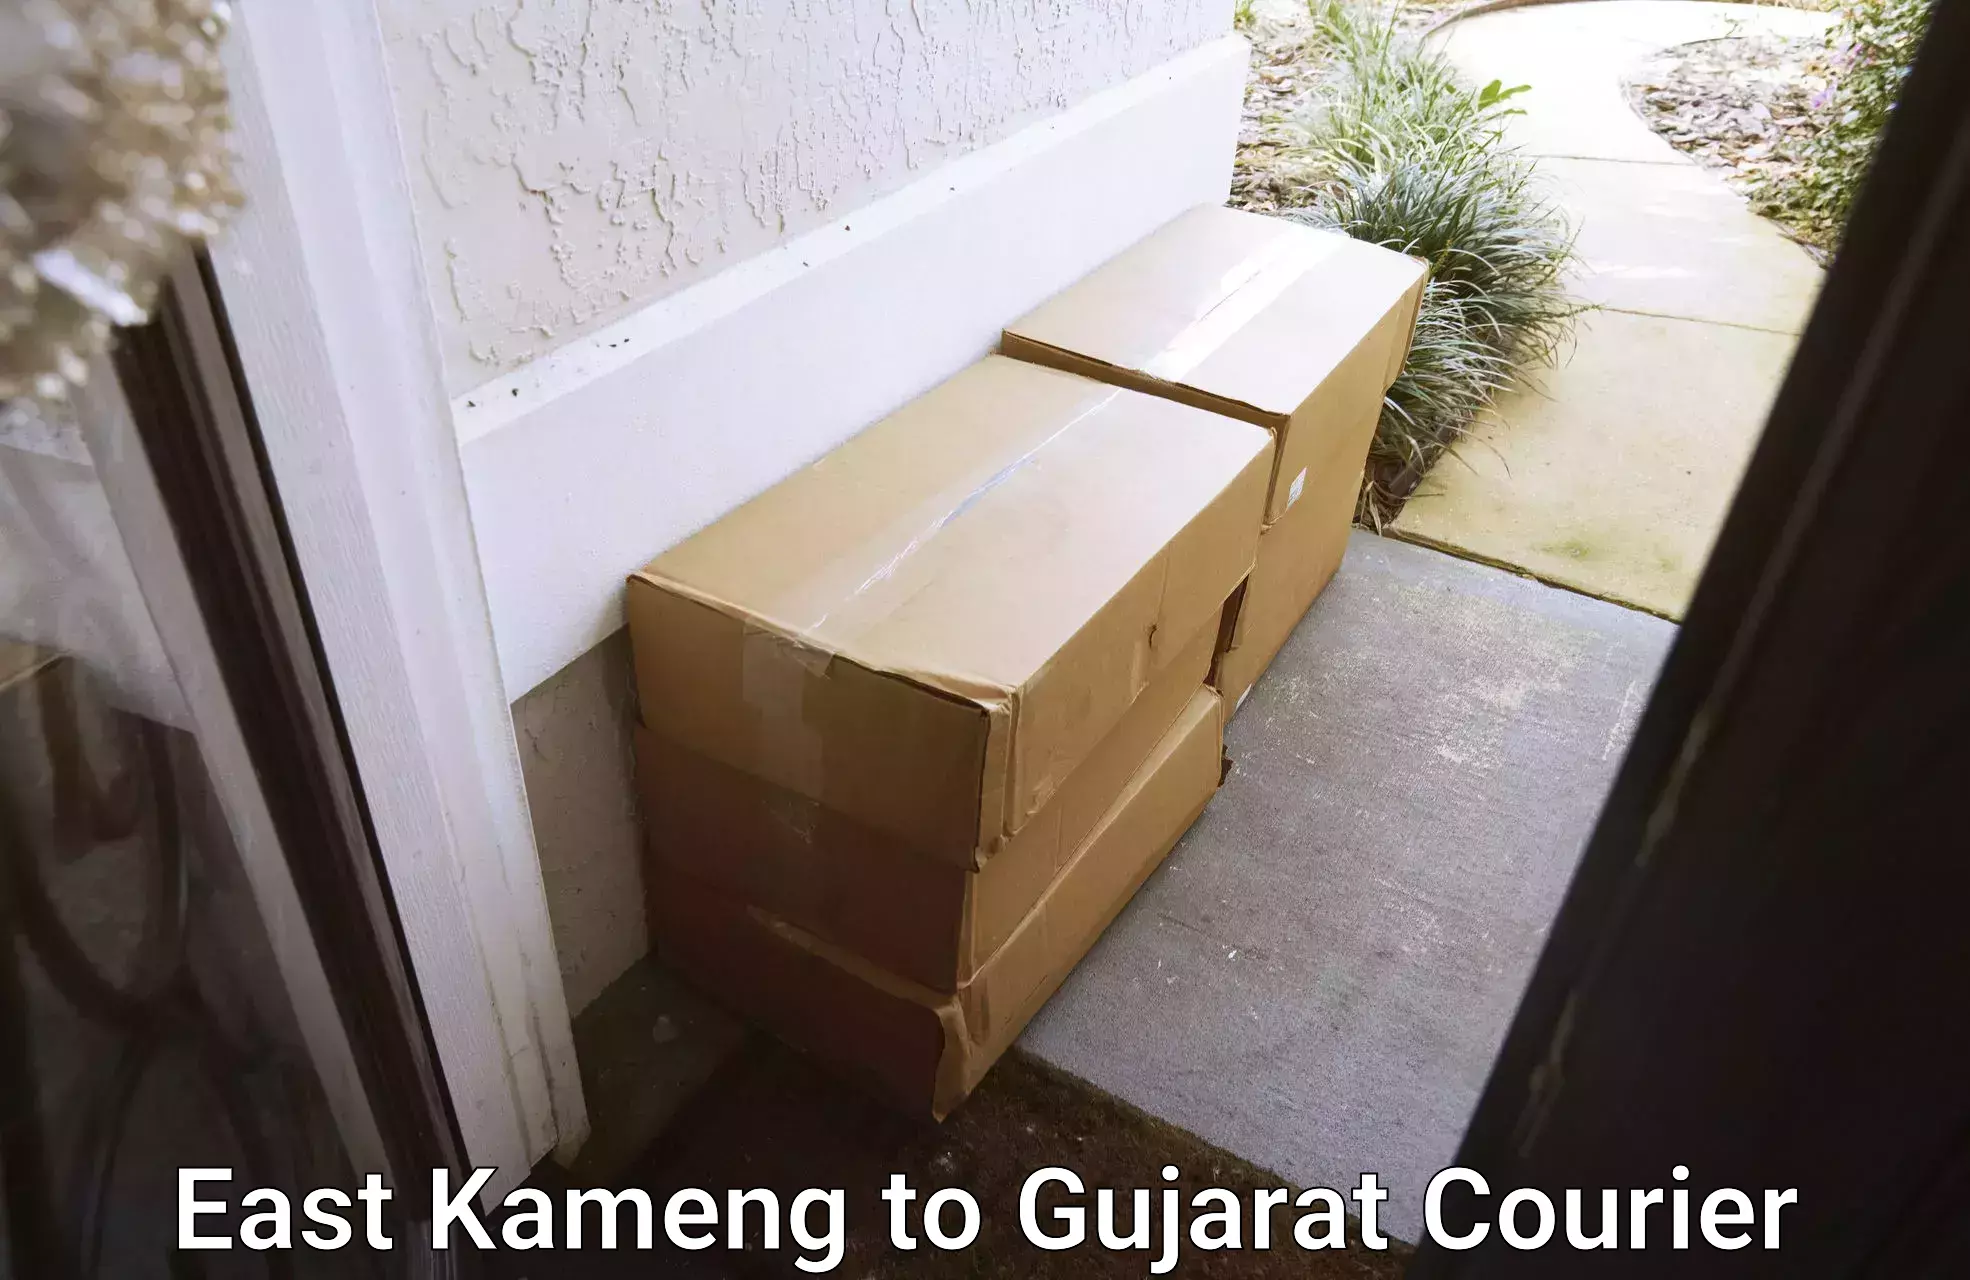 Next day courier East Kameng to Gujarat